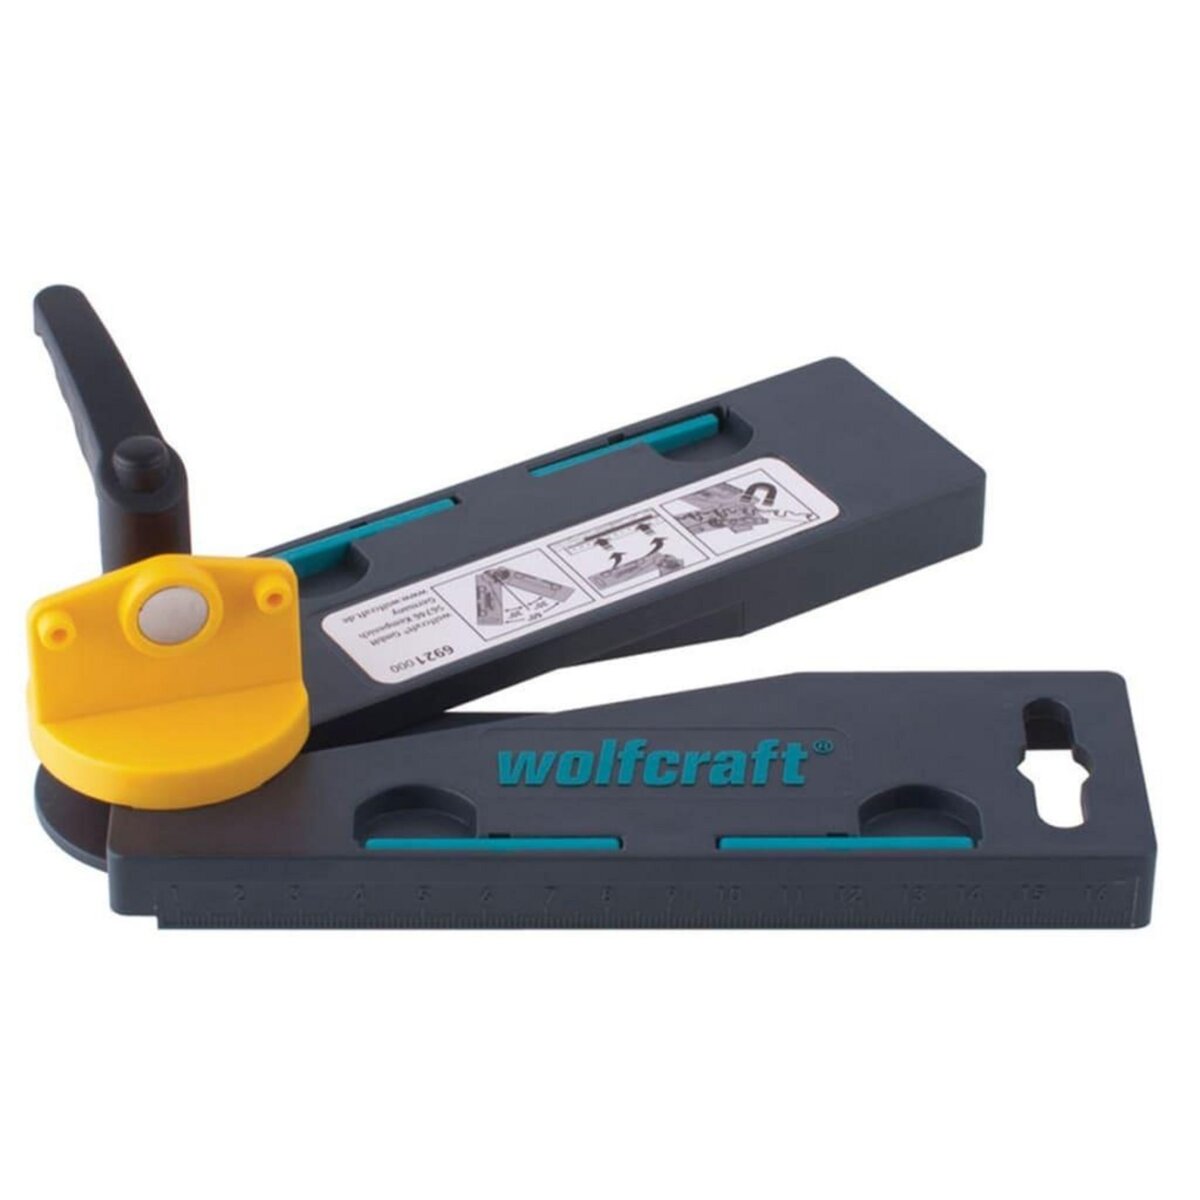 WOLFCRAFT wolfcraft Fausse equerre avec bissectrice d'angle